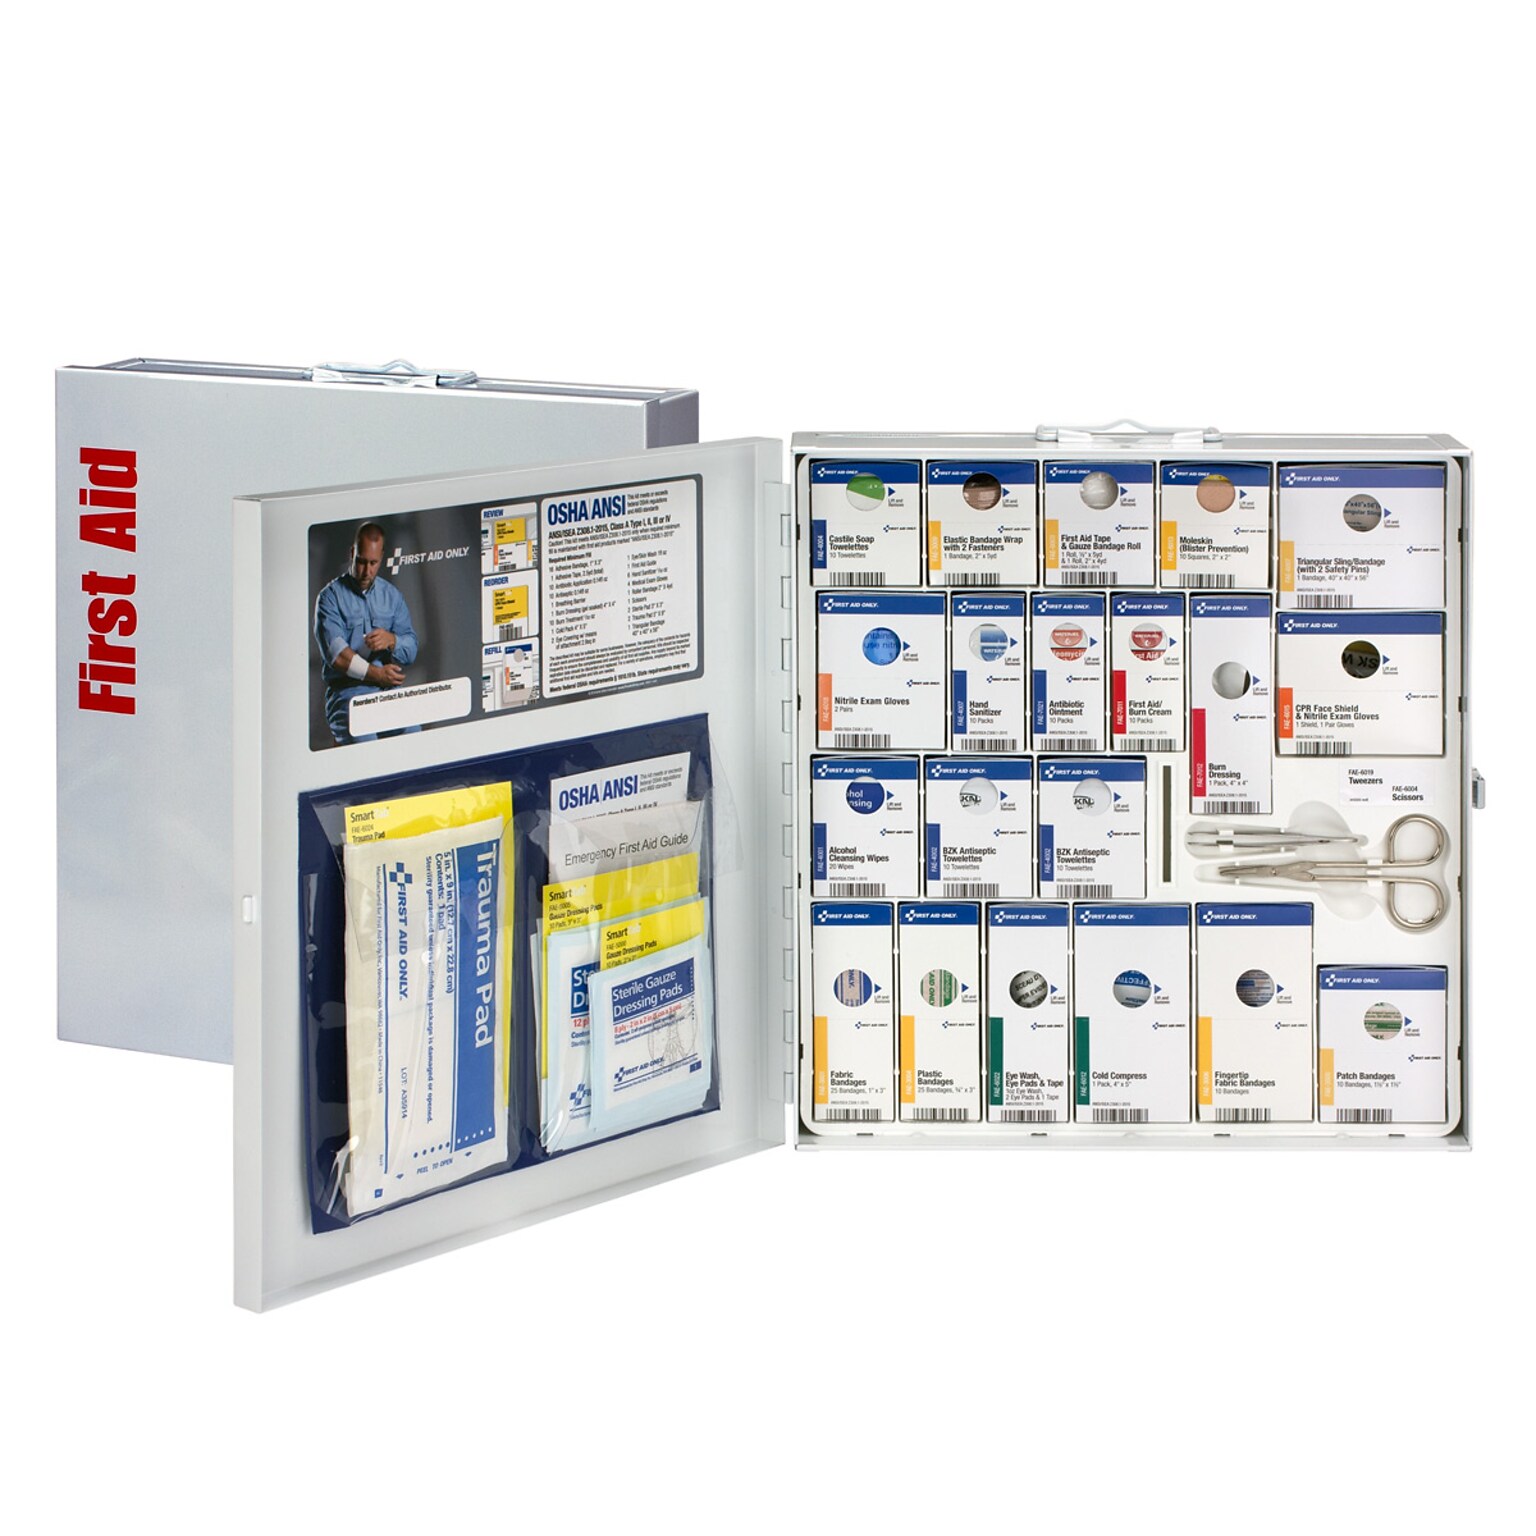 SmartCompliance Metal First Aid Cabinet without Medication, ANSI Class A, 50 People, 203 Pieces (746004-021)